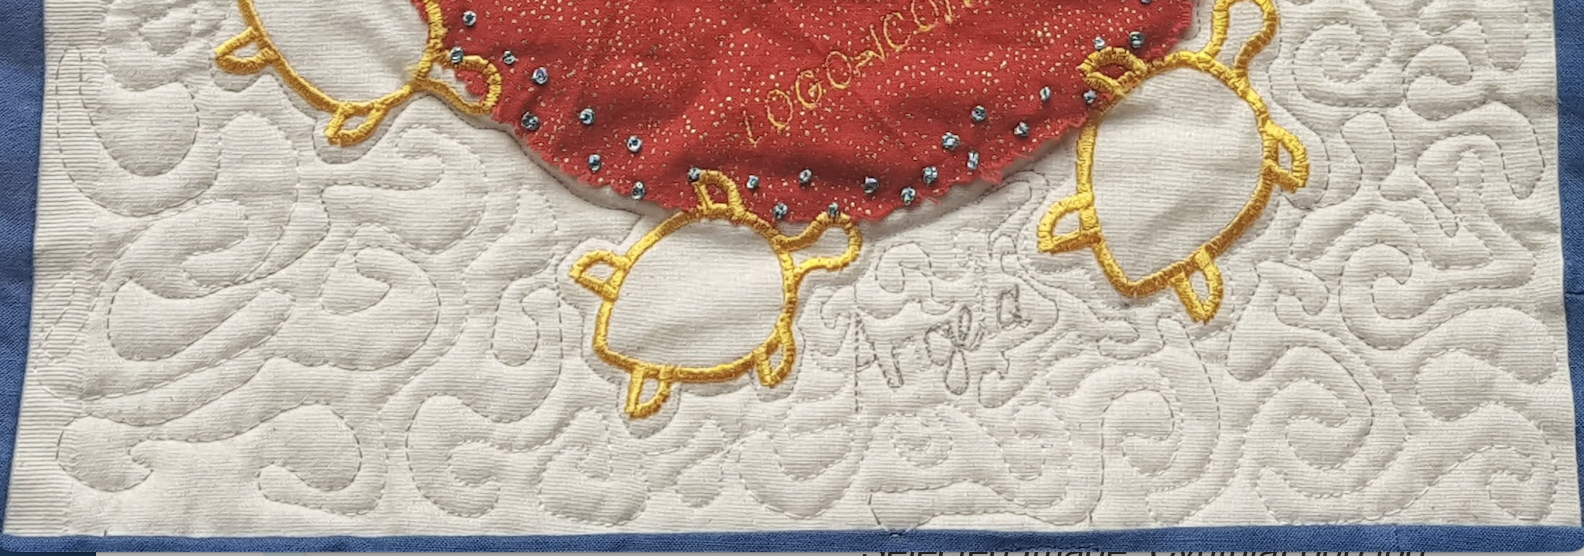 a close up on a square from a quilt, featured a central red circle, surrounded by yellow turtles, with the name ANGELA stitched into the cream square.